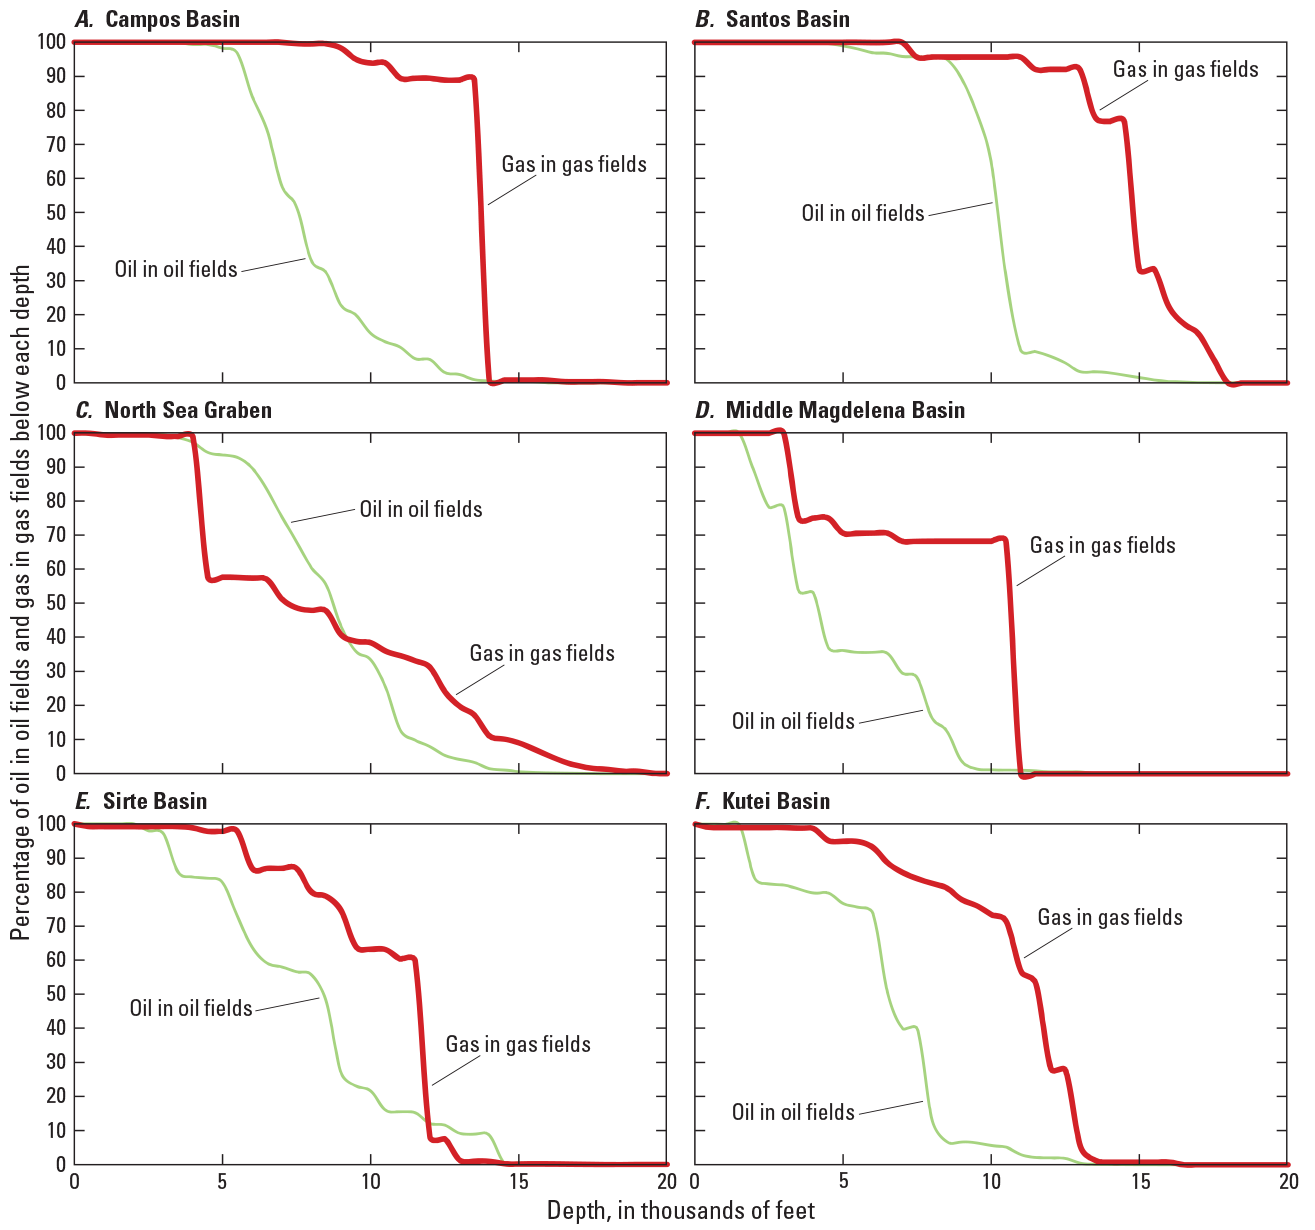 Six graphs showing oil in oil fields (green) and gas in gas fields (red) as lines.